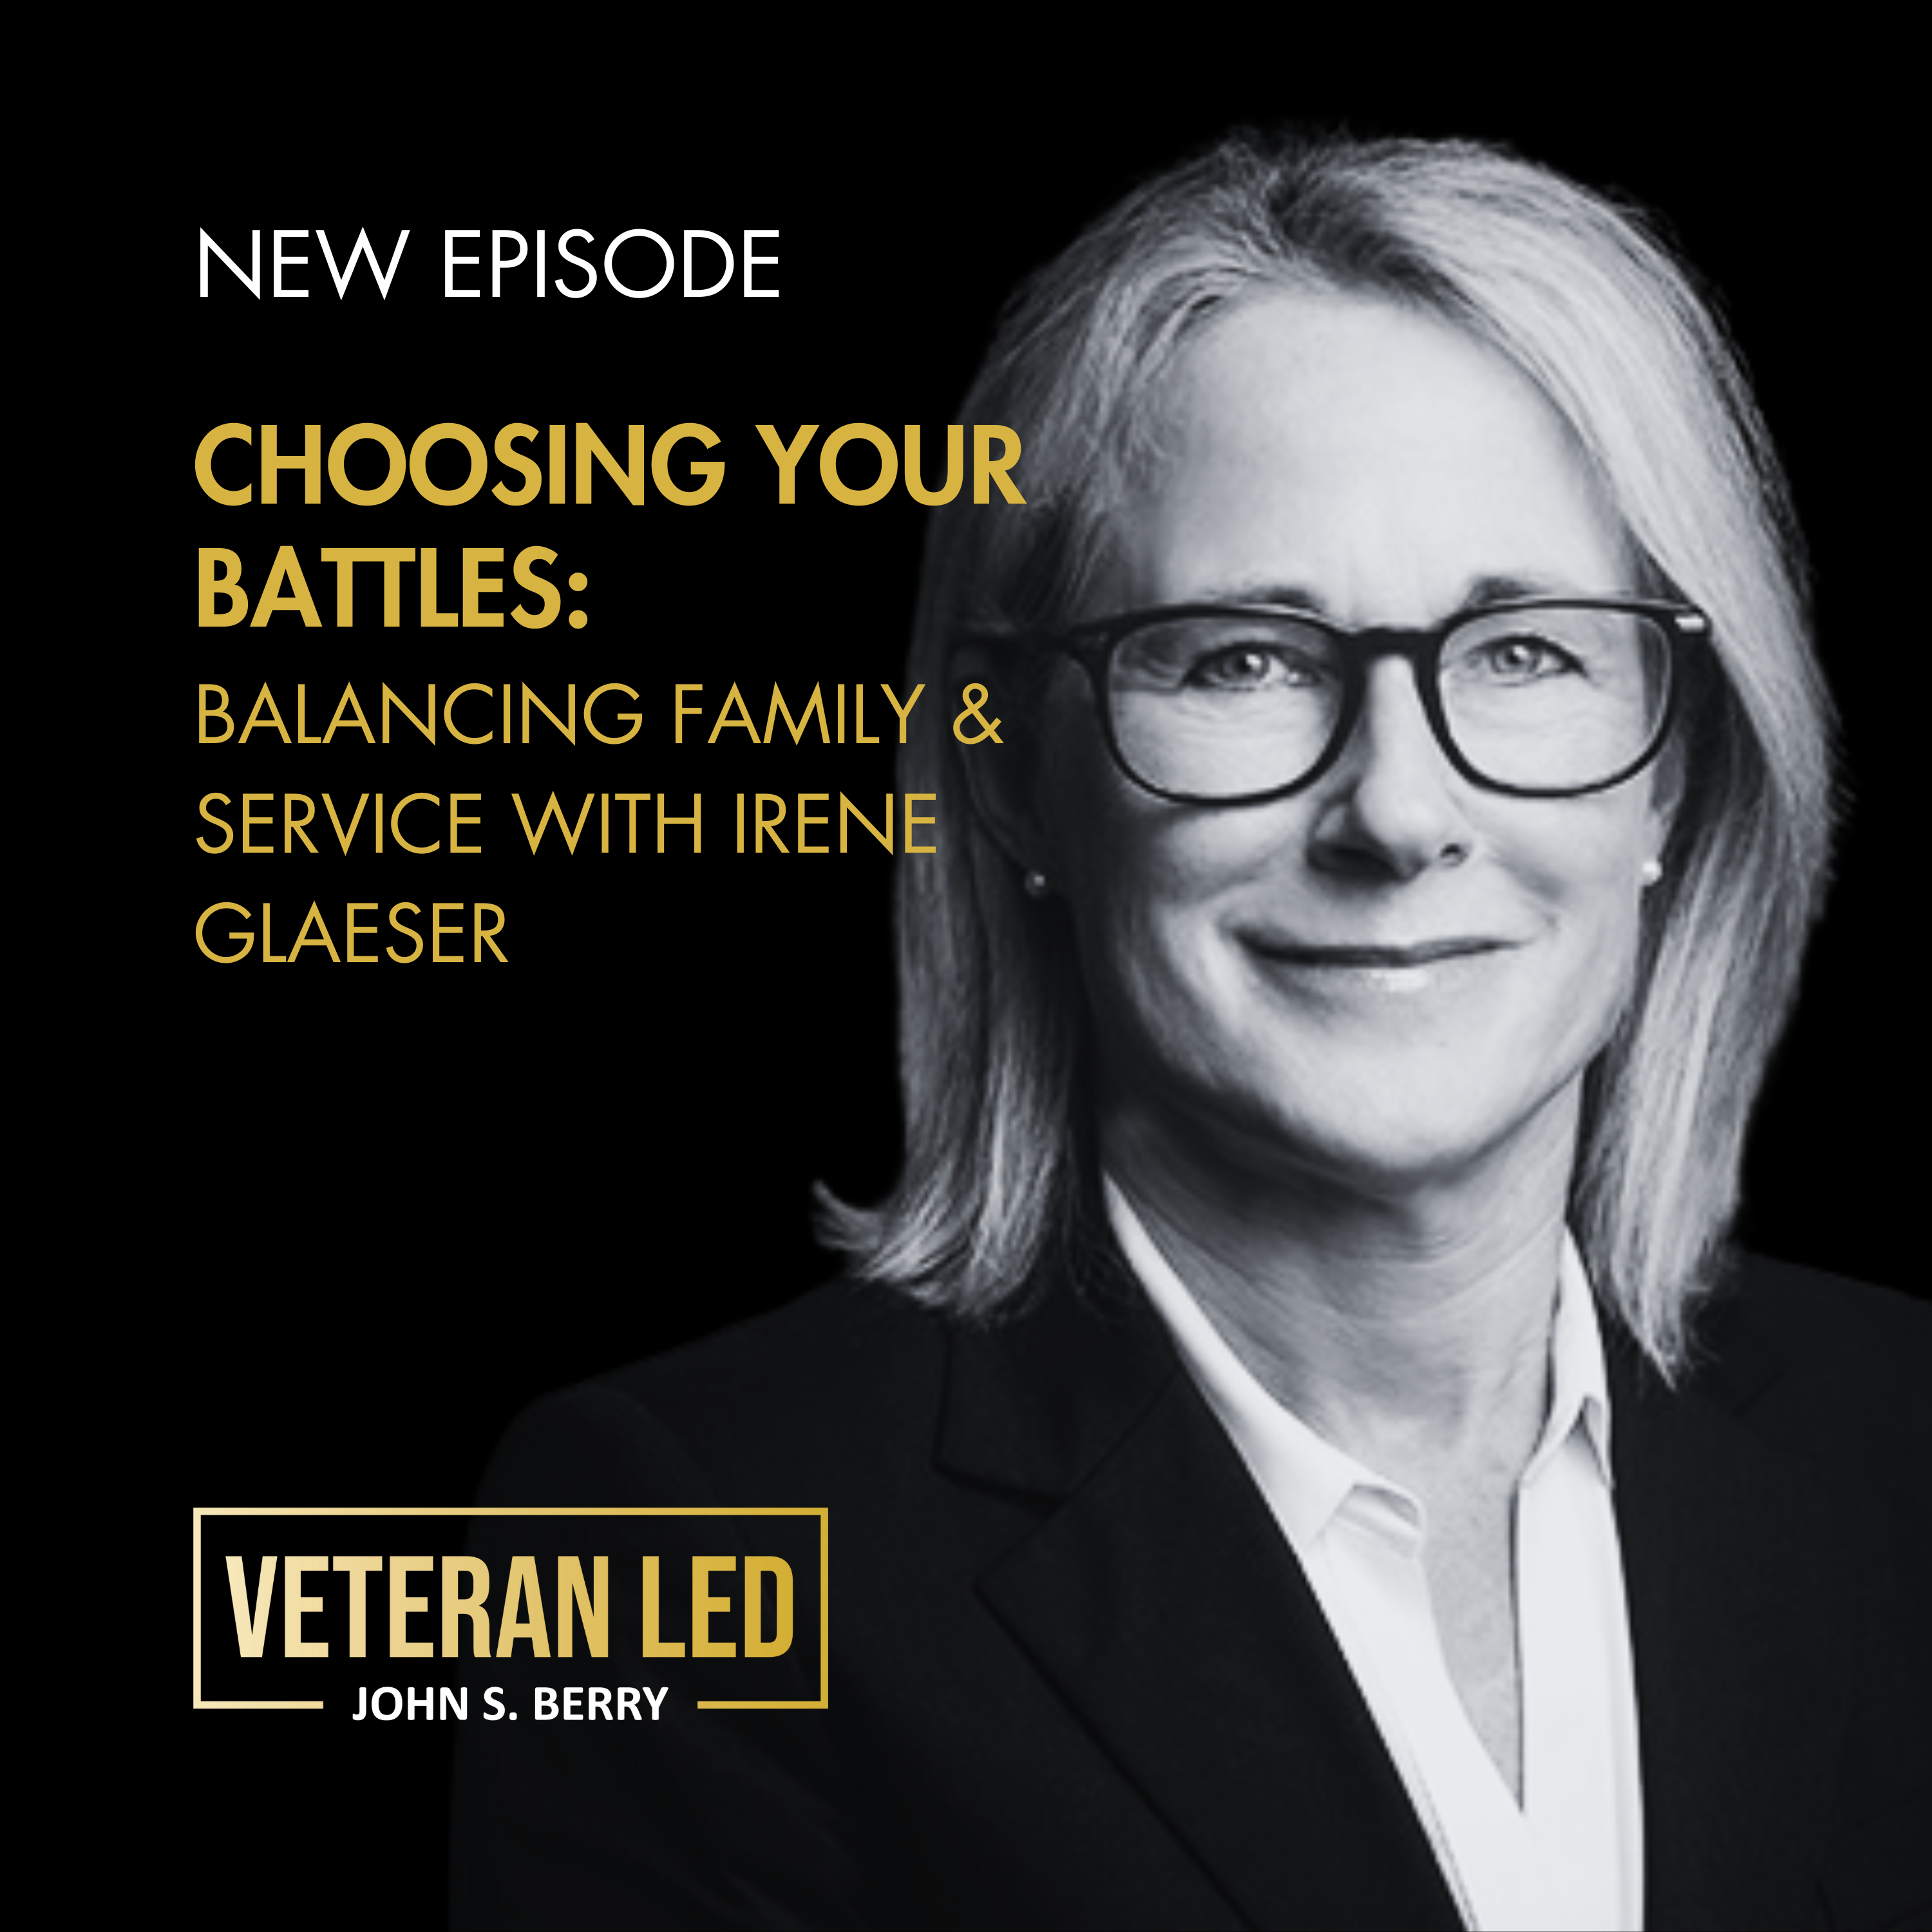 Episode 66: Choosing Your Battles: Balancing Family & Service with Irene Glaeser